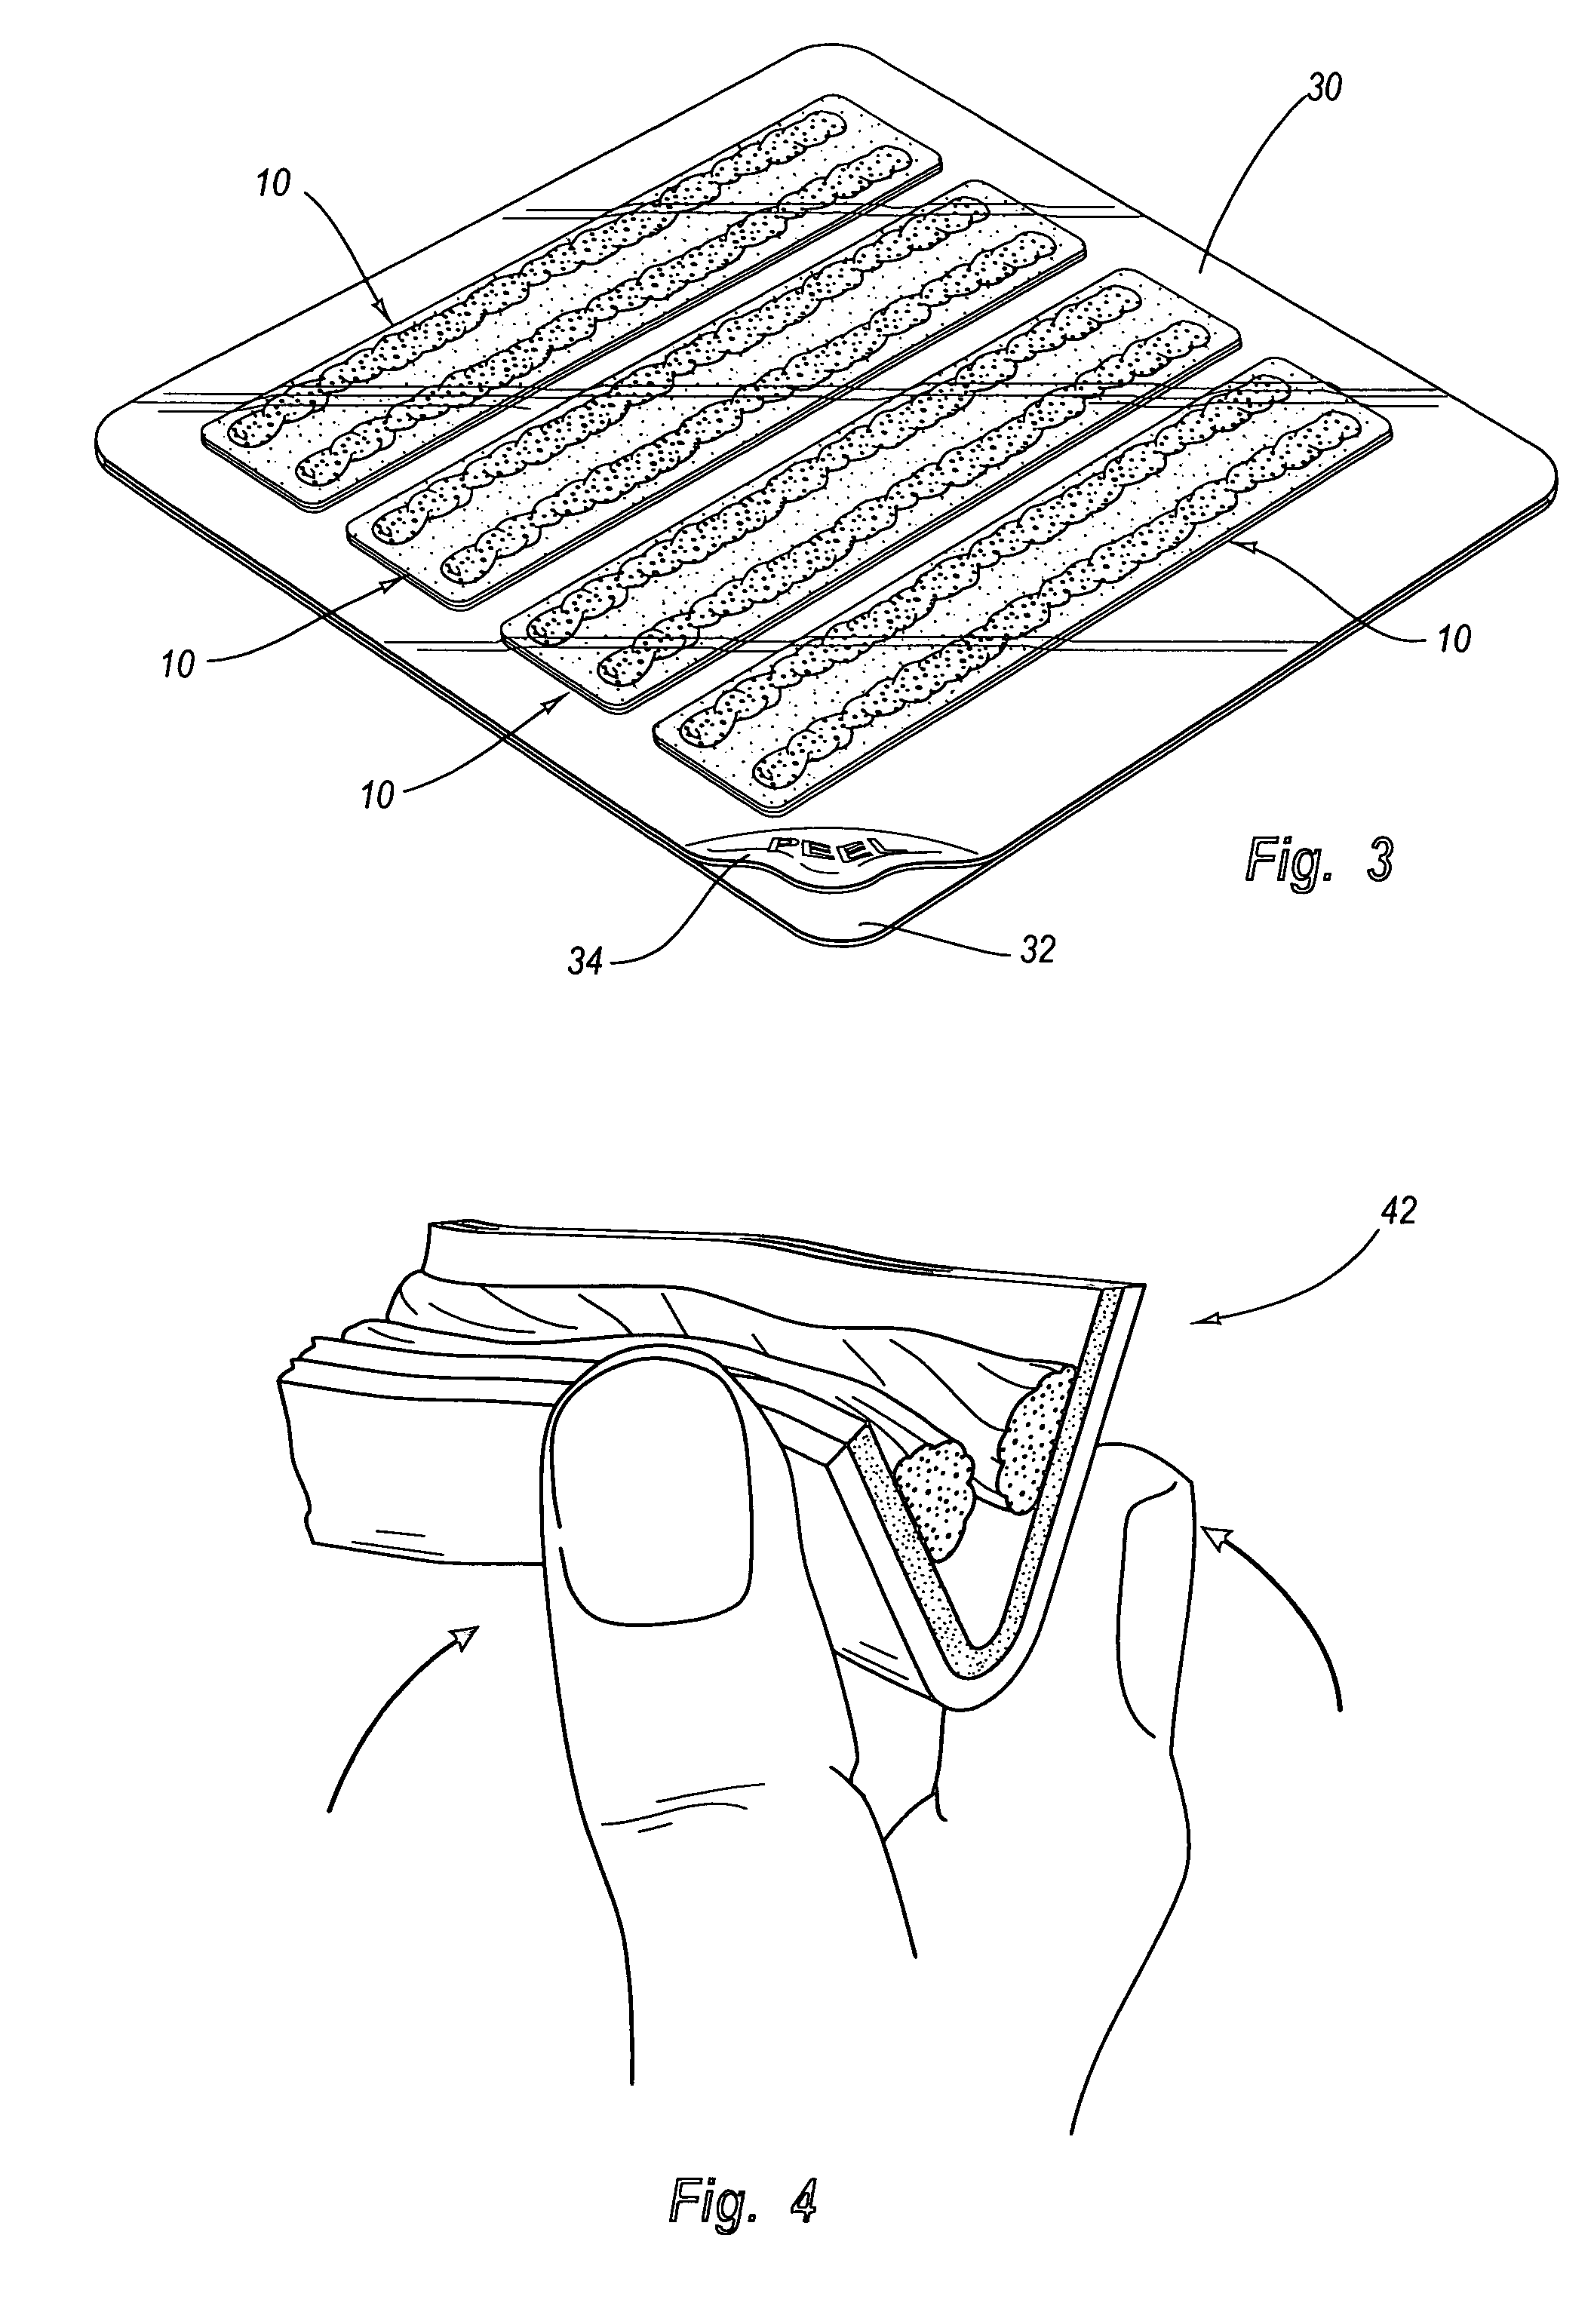 Treatment compositions and strips having a solid adhesive layer and treatment gel adjacent thereto